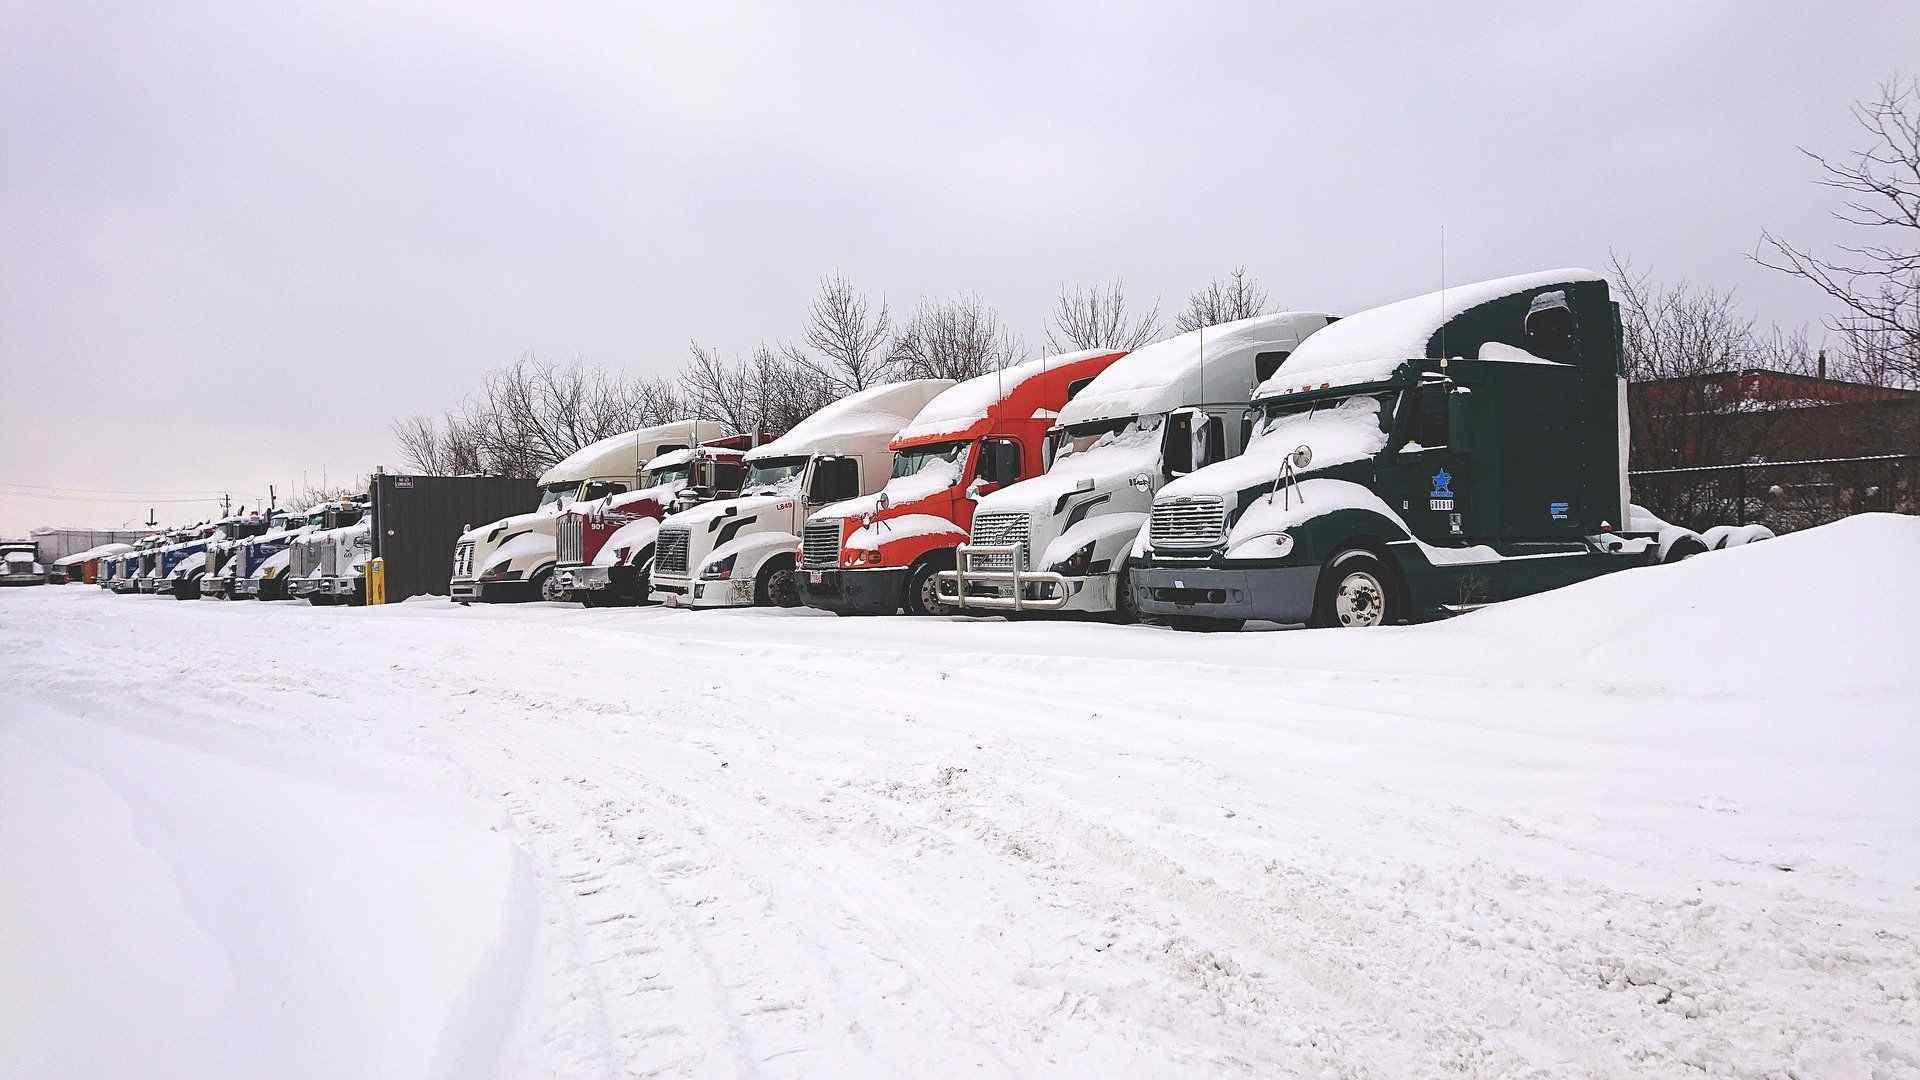 black, grey, red, and white trucks in snow diesel fuel gelling prevention tips